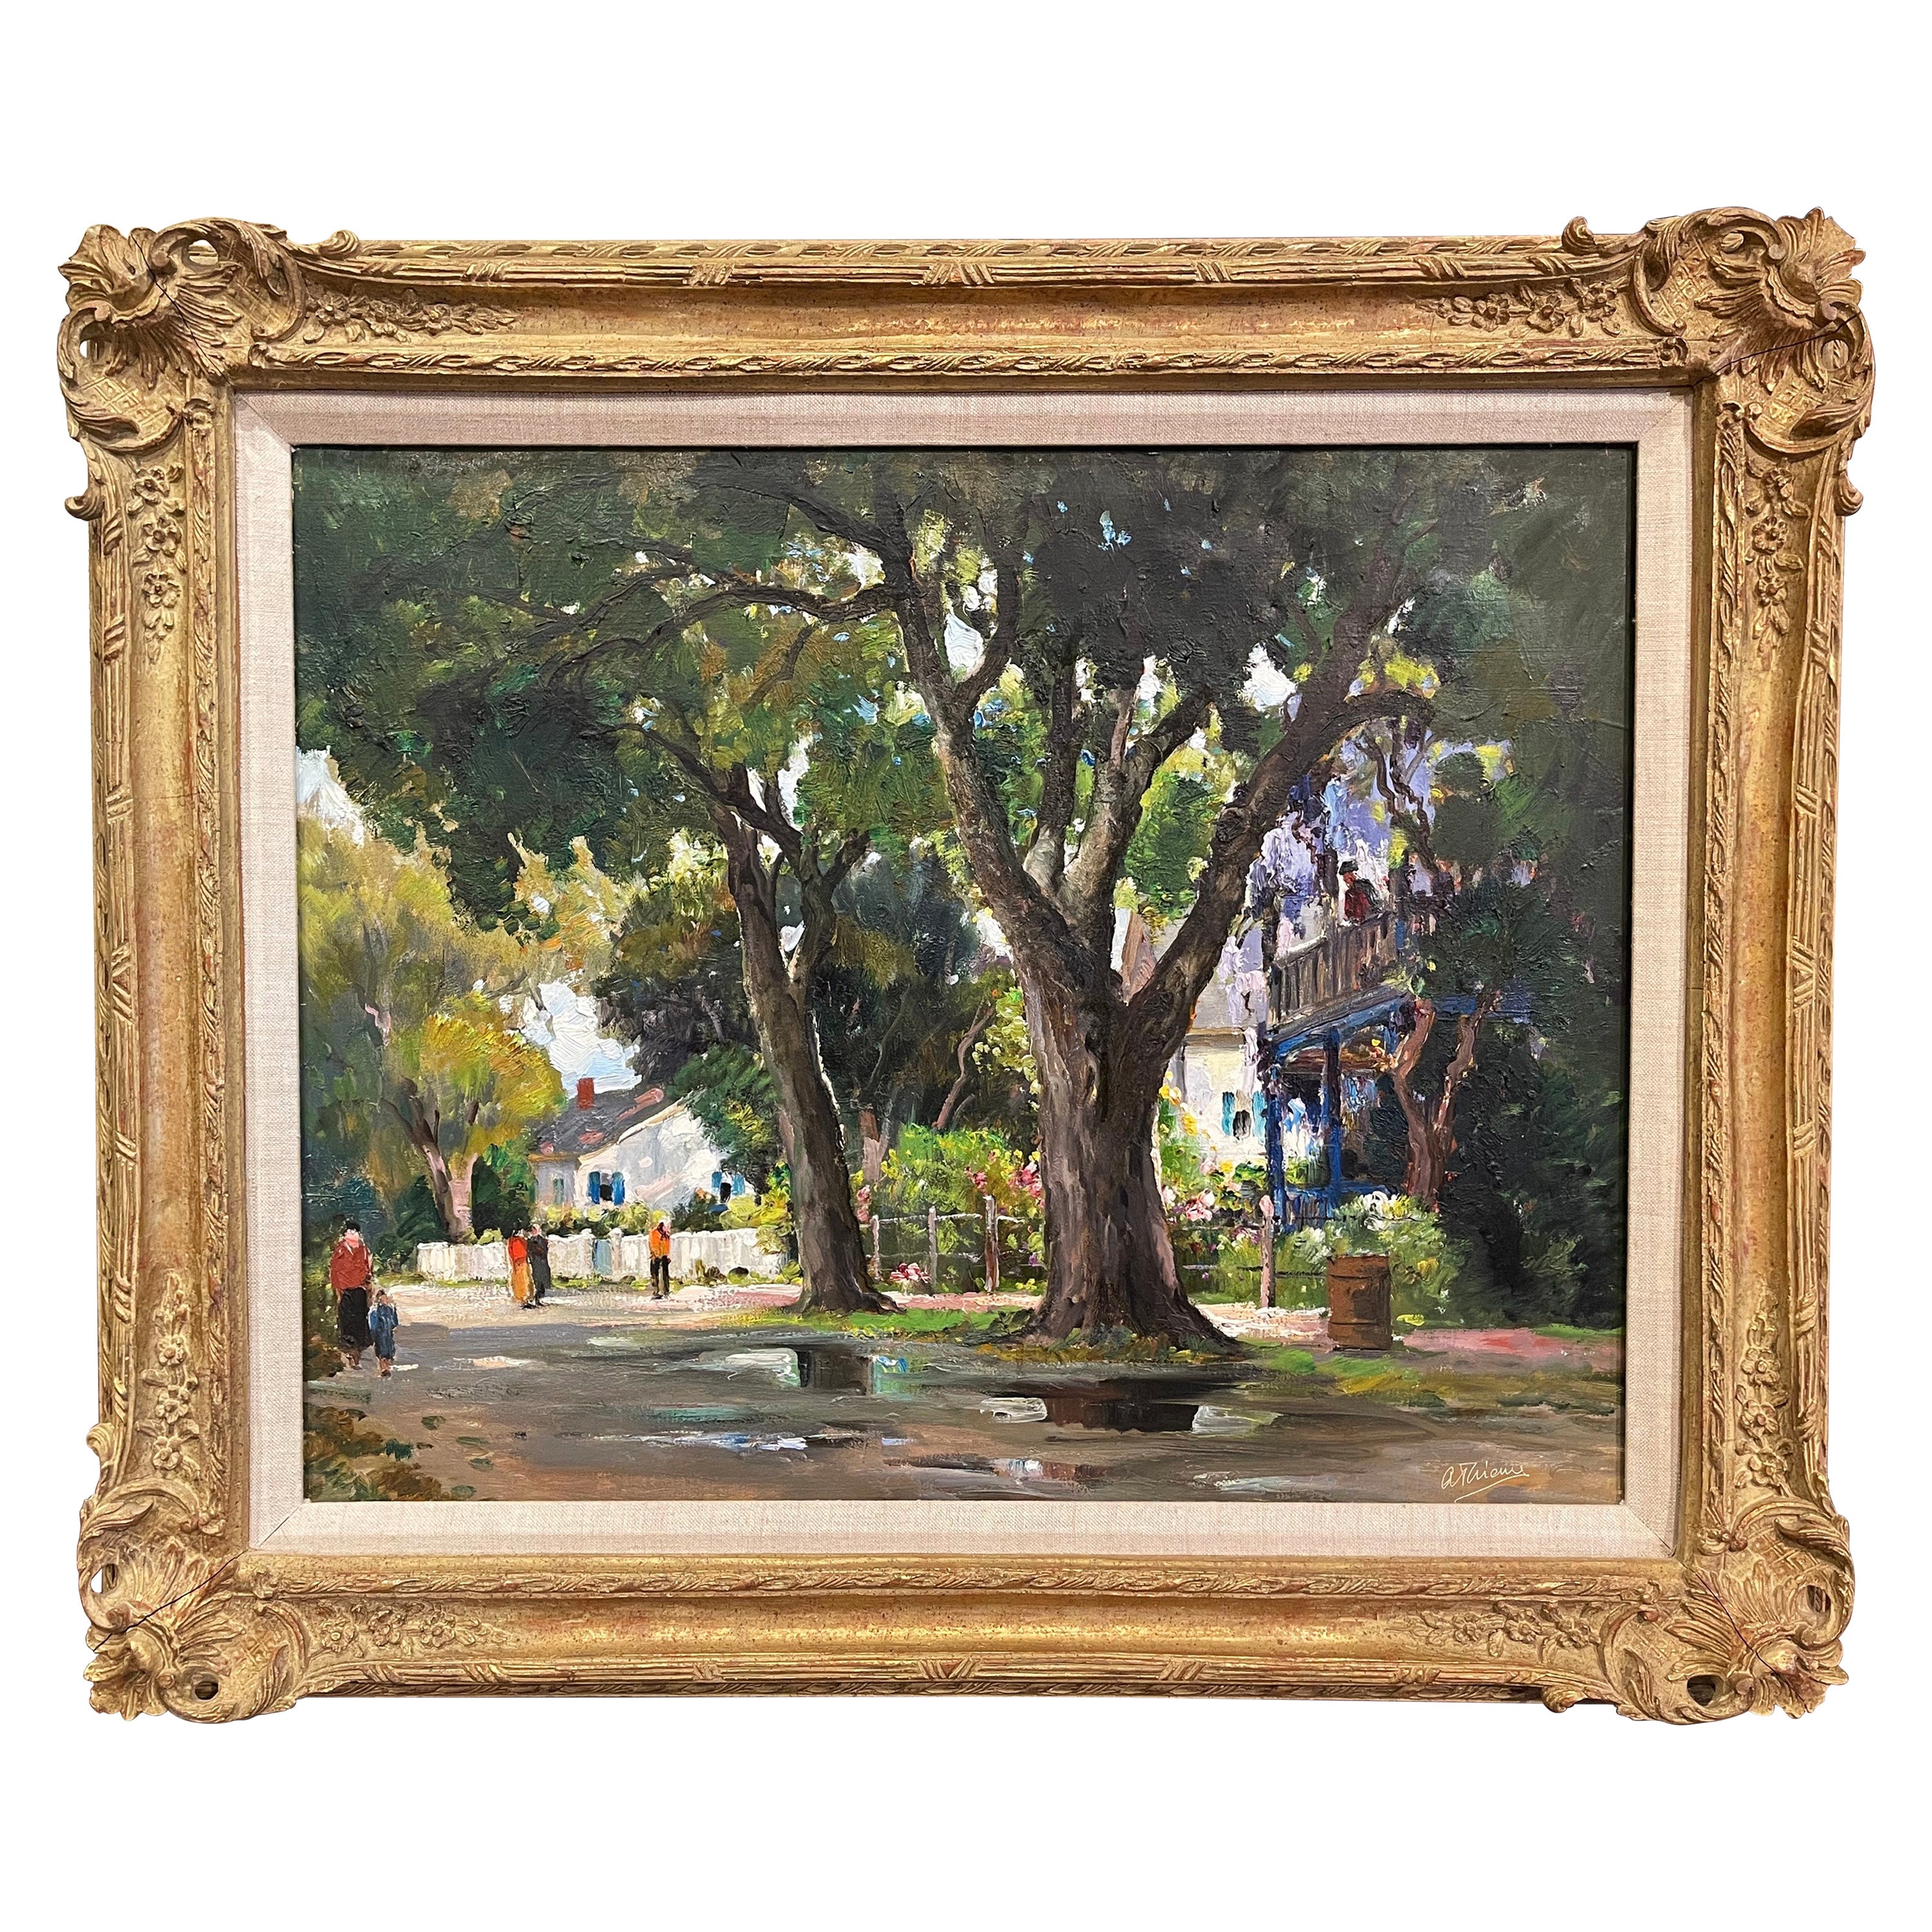 Framed Oil on Canvas Painting Titled "Sun and Shade" Signed by Anthony Thieme For Sale